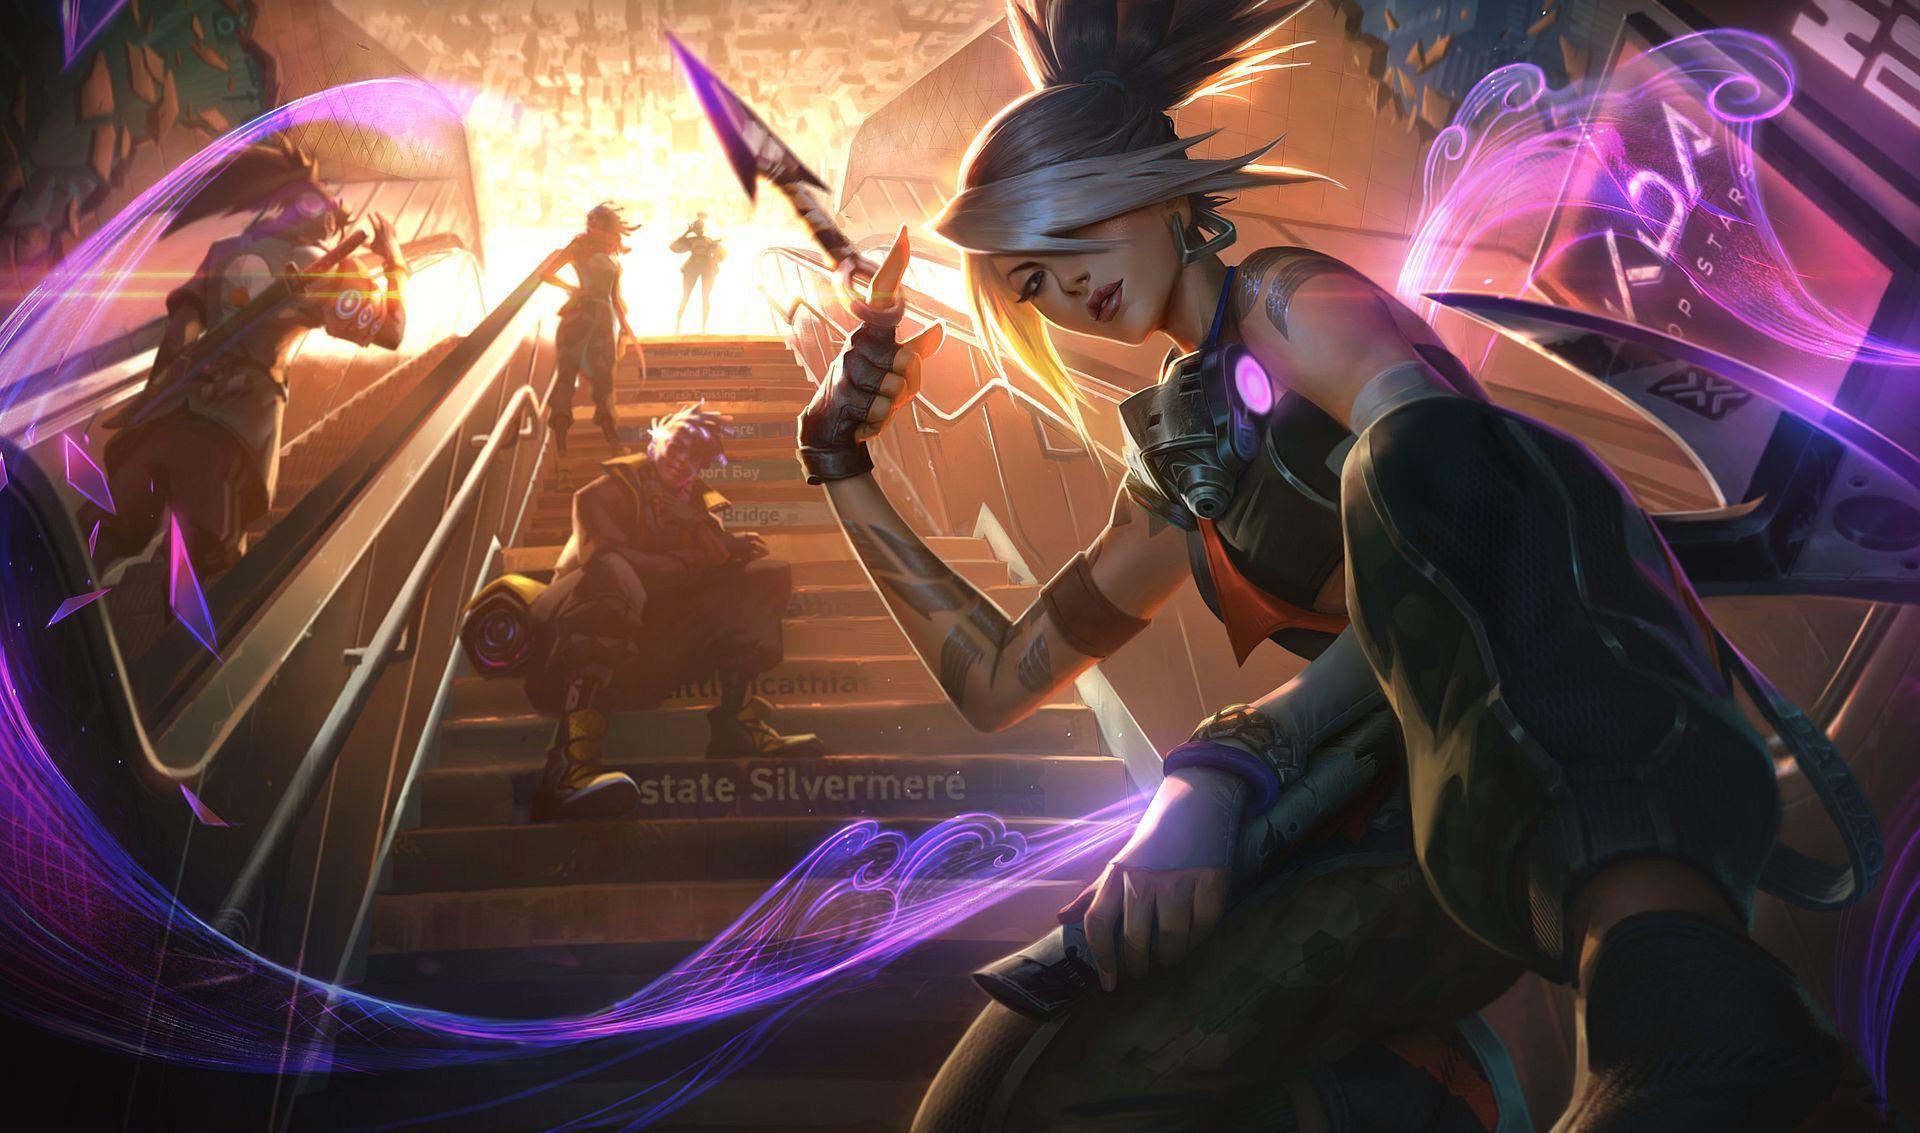 20+ Senna (League of Legends) HD Wallpapers and Backgrounds